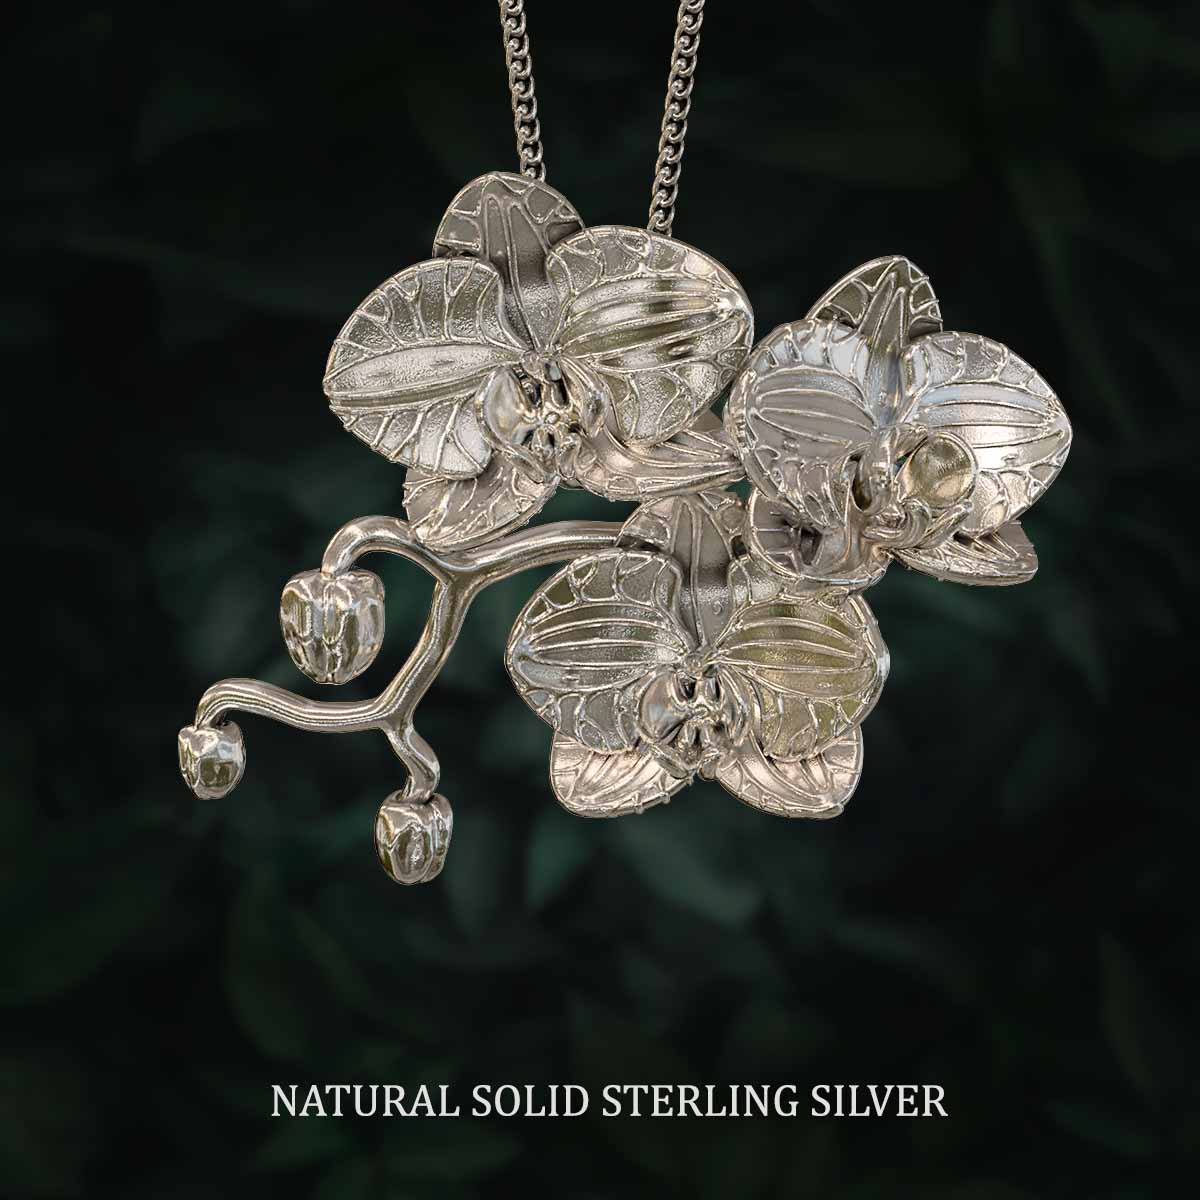 Natural-Satin-Polish-Solid-Sterling-Silver-Three-Orchid-Flowers-Pendant-Jewelry-For-Necklace